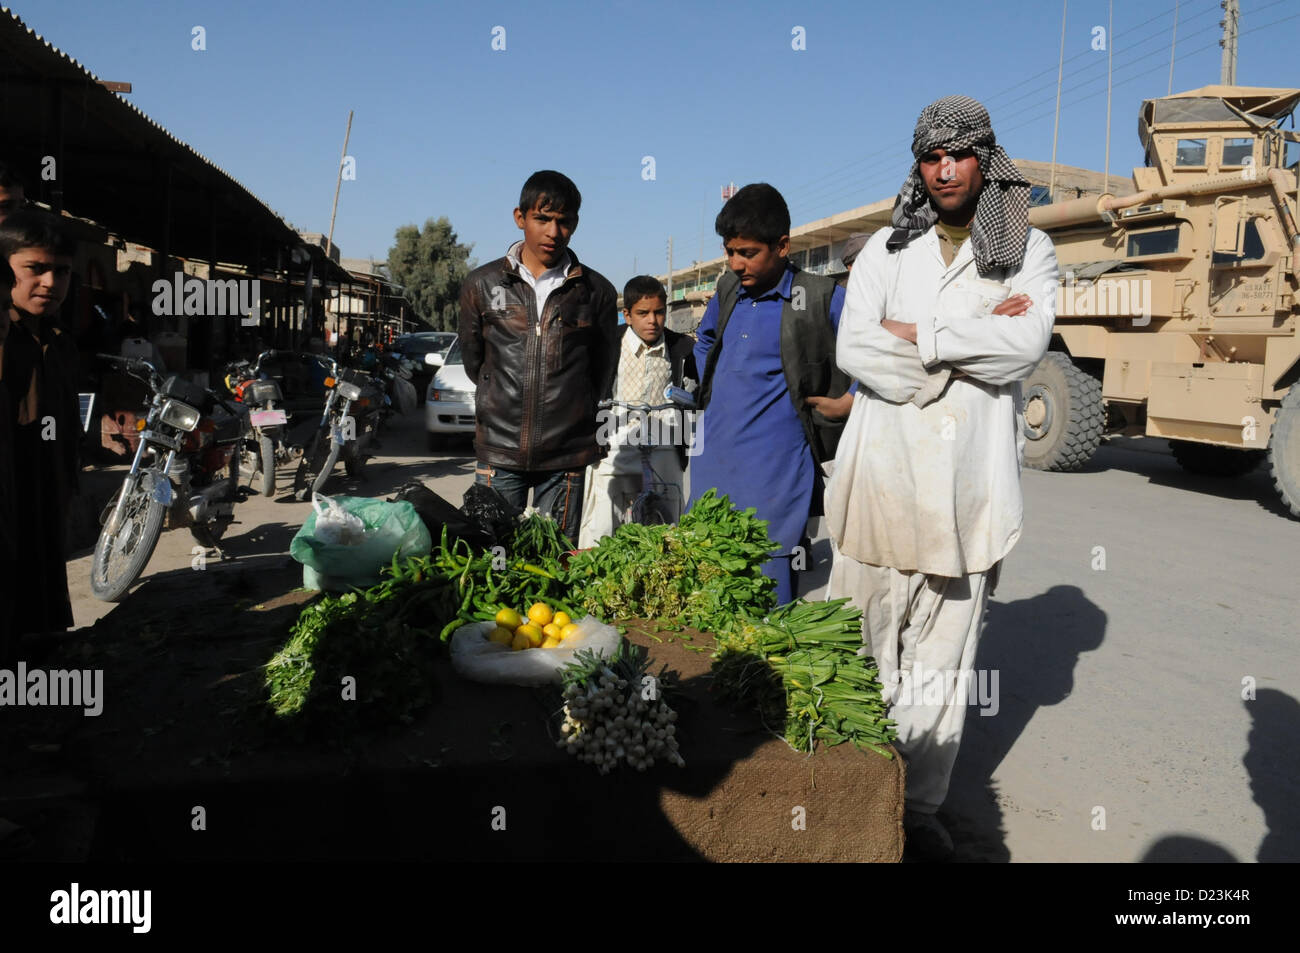 An Afghan produce seller, right, stands next to his vegetable cart in Farah City, Jan. 13.  PRT Farah visited a nearby bank to discuss small business development and growth initiatives in Farah.  PRT Farah's mission is to train, advise, and assist Afghan government leaders at the municipal, district, and provincial levels in Farah province Afghanistan.  Their civil military team is comprised of members of the U.S. Navy, U.S. Army, the U.S. Department of State and the U.S. Agency for International Development (USAID).  (U.S. Navy photo by Lt. j.g. Matthew Stroup/released) Stock Photo